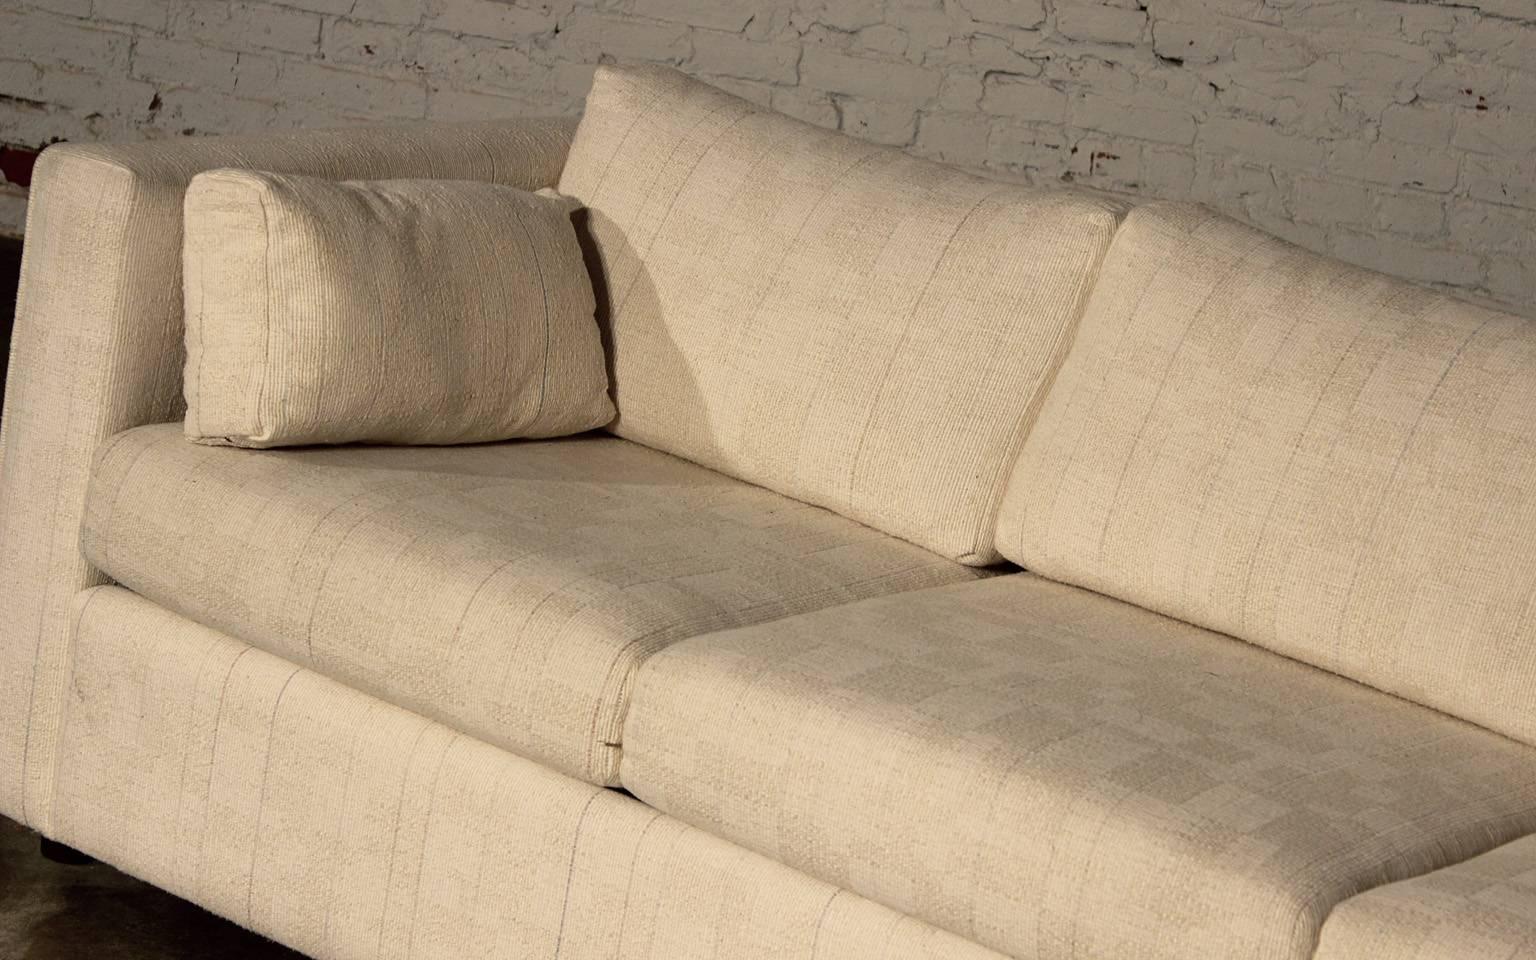 Great Mid-Century Modern sleeper sofa or hide-a-bed in neutral white nubby fabric and tuxedo styling. It is in wonderful vintage condition.

With the trend toward small homes and loft living this awesome Mid-Century Modern sleeper sofa is just